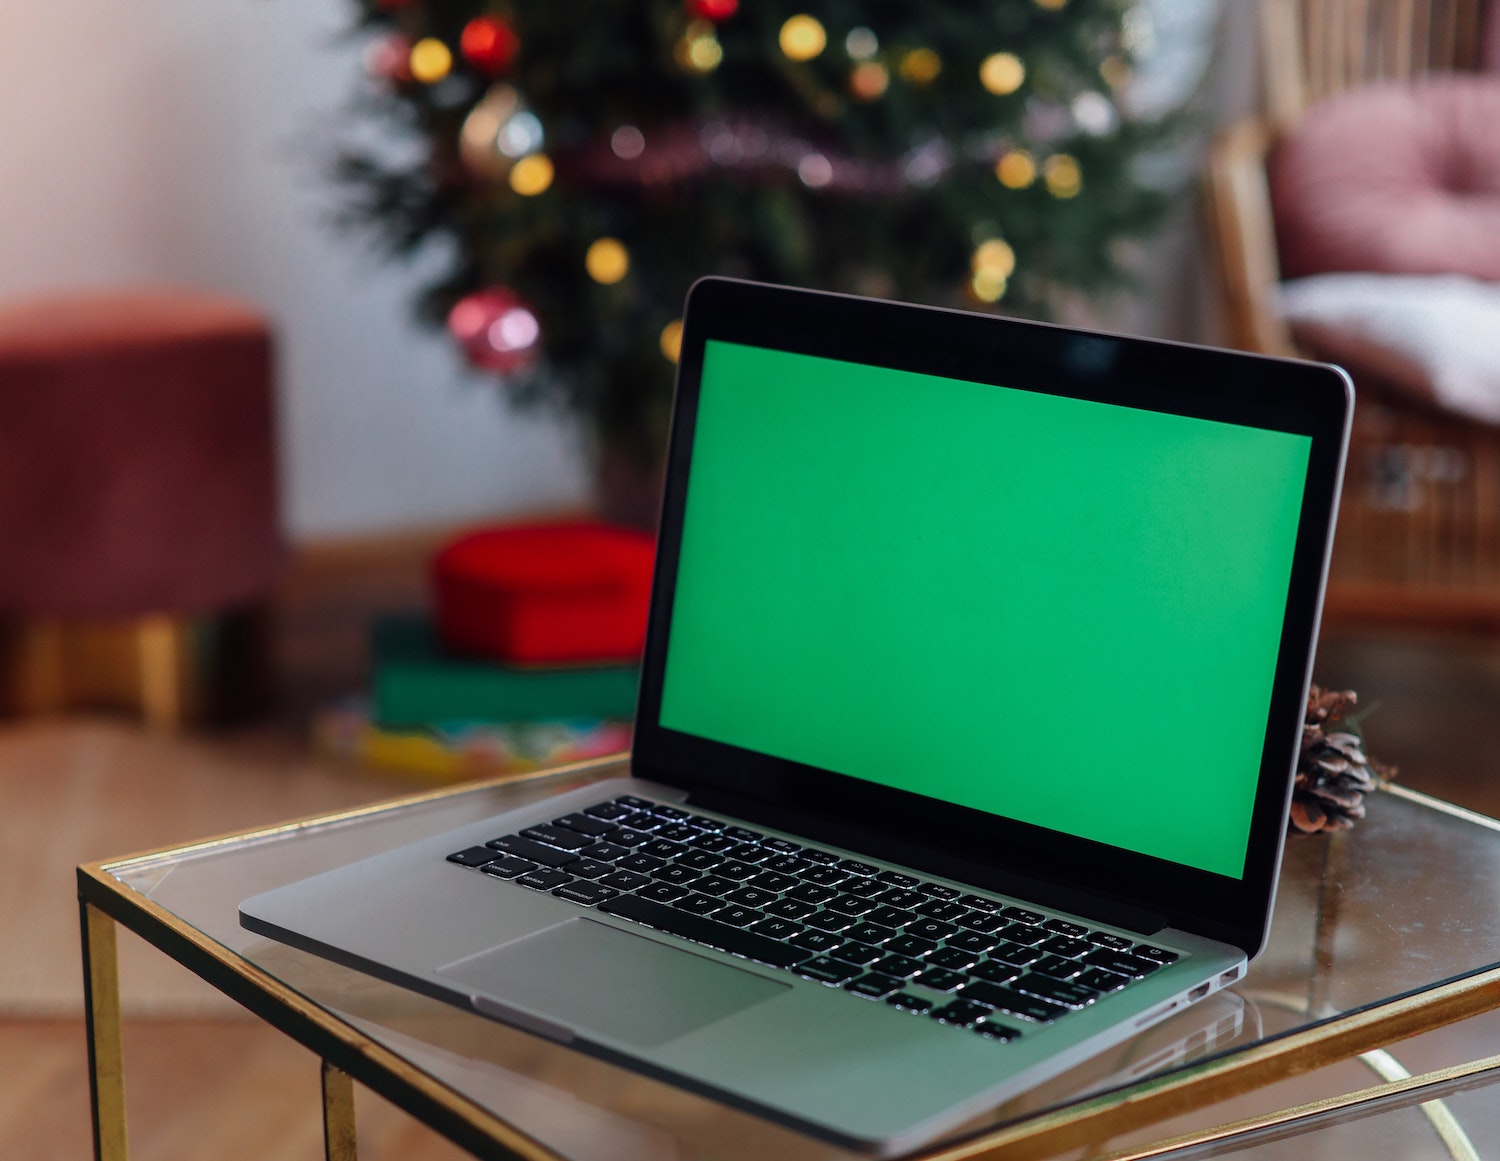 Working during the holidays? Here are 5 tips to boost your productivity | vertical market software